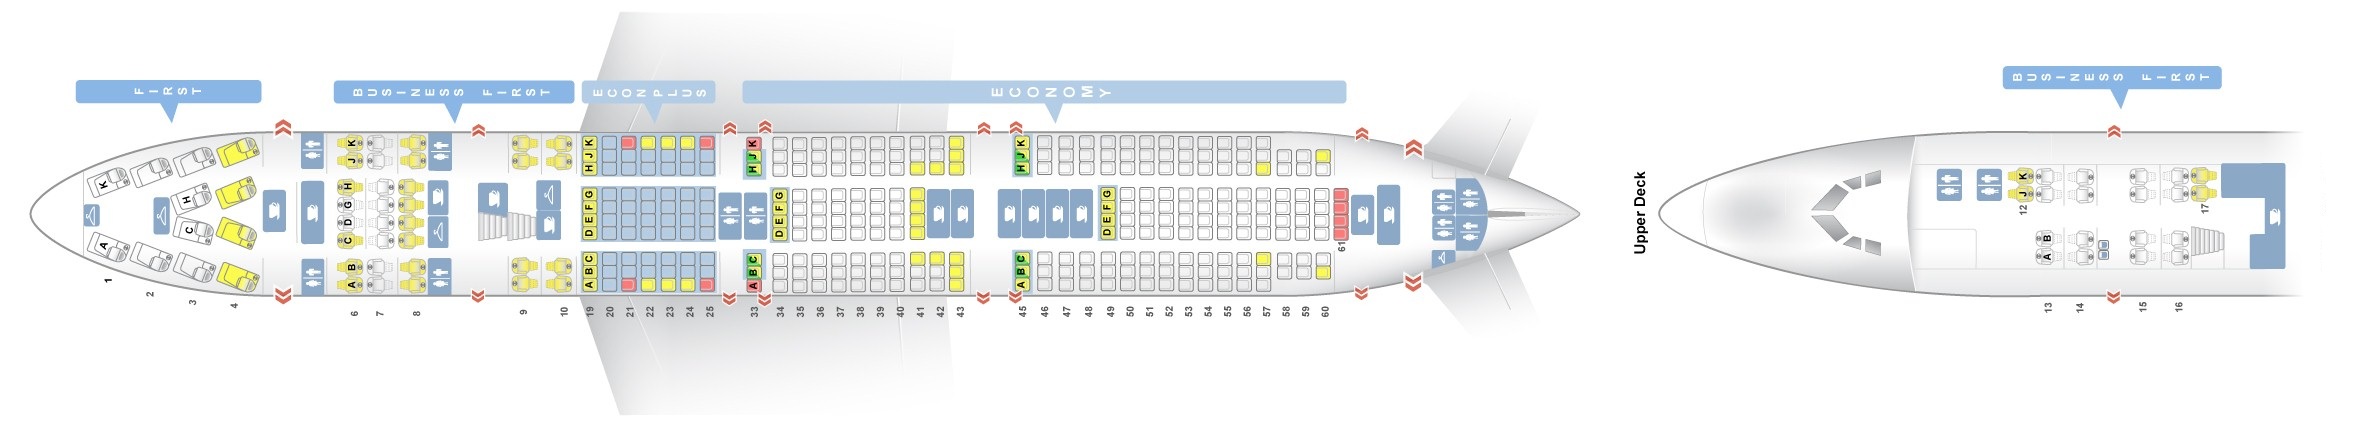 Seat Map Boeing 747 400 United Airlines Best Seats In Plane